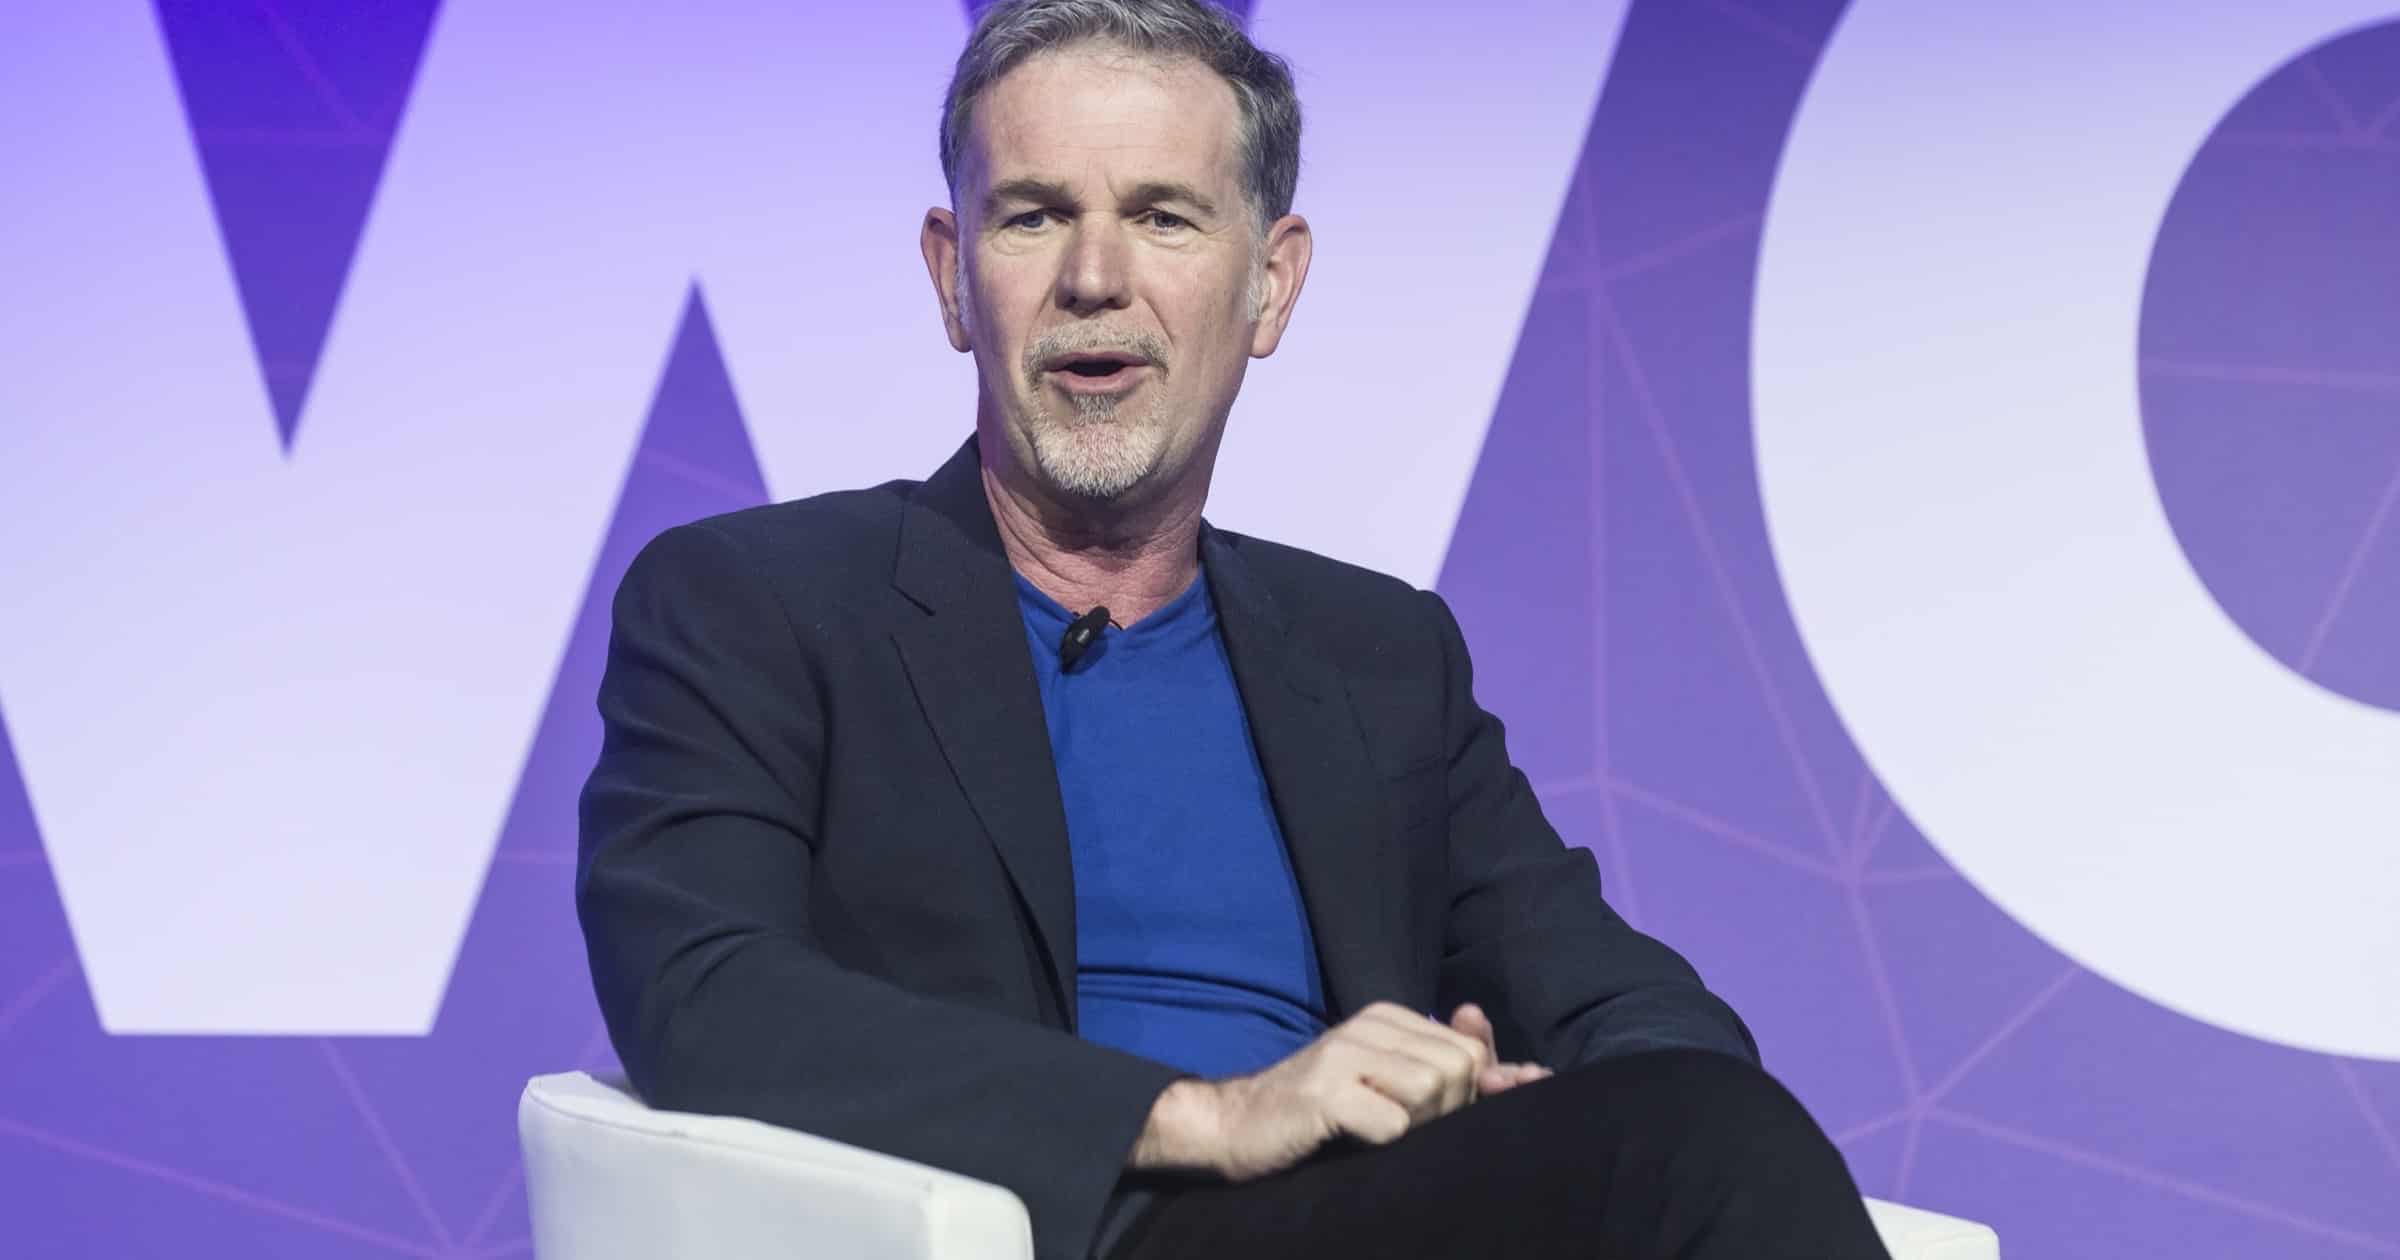 Netflix CEO Reed hastings